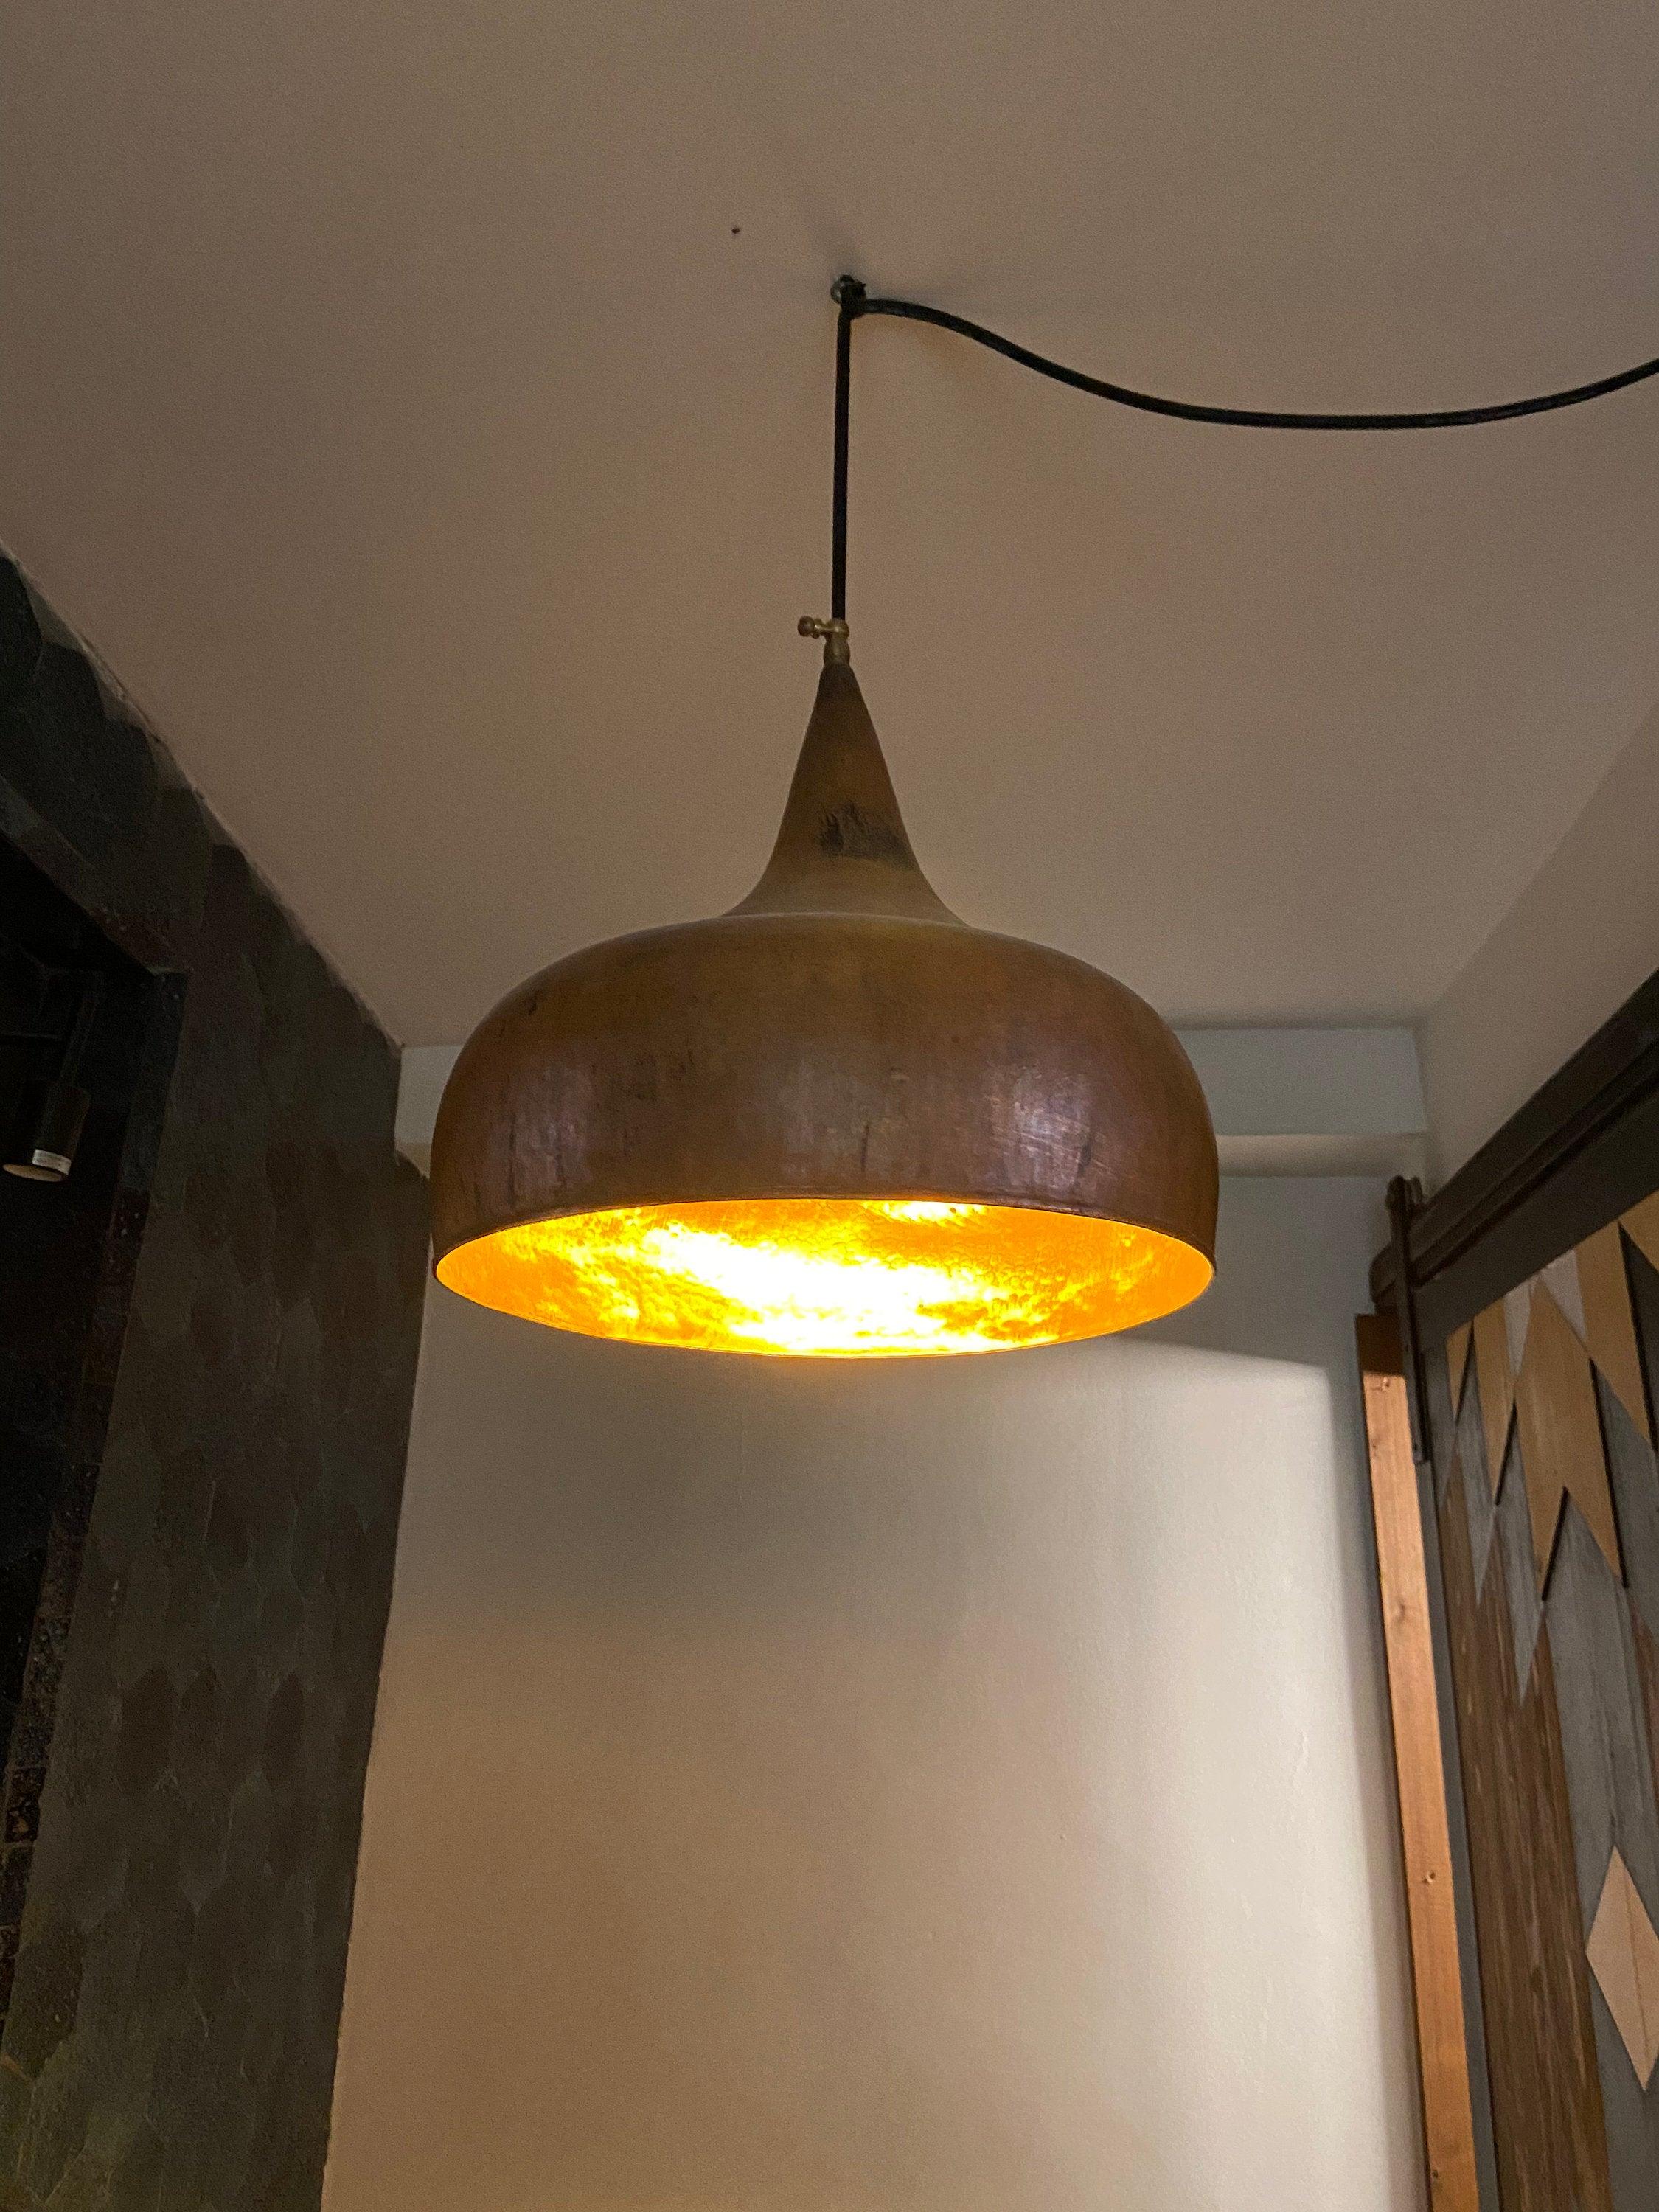 Aged Rustic Copper Farmhouse Pendant Light with Antique Finish Zayian